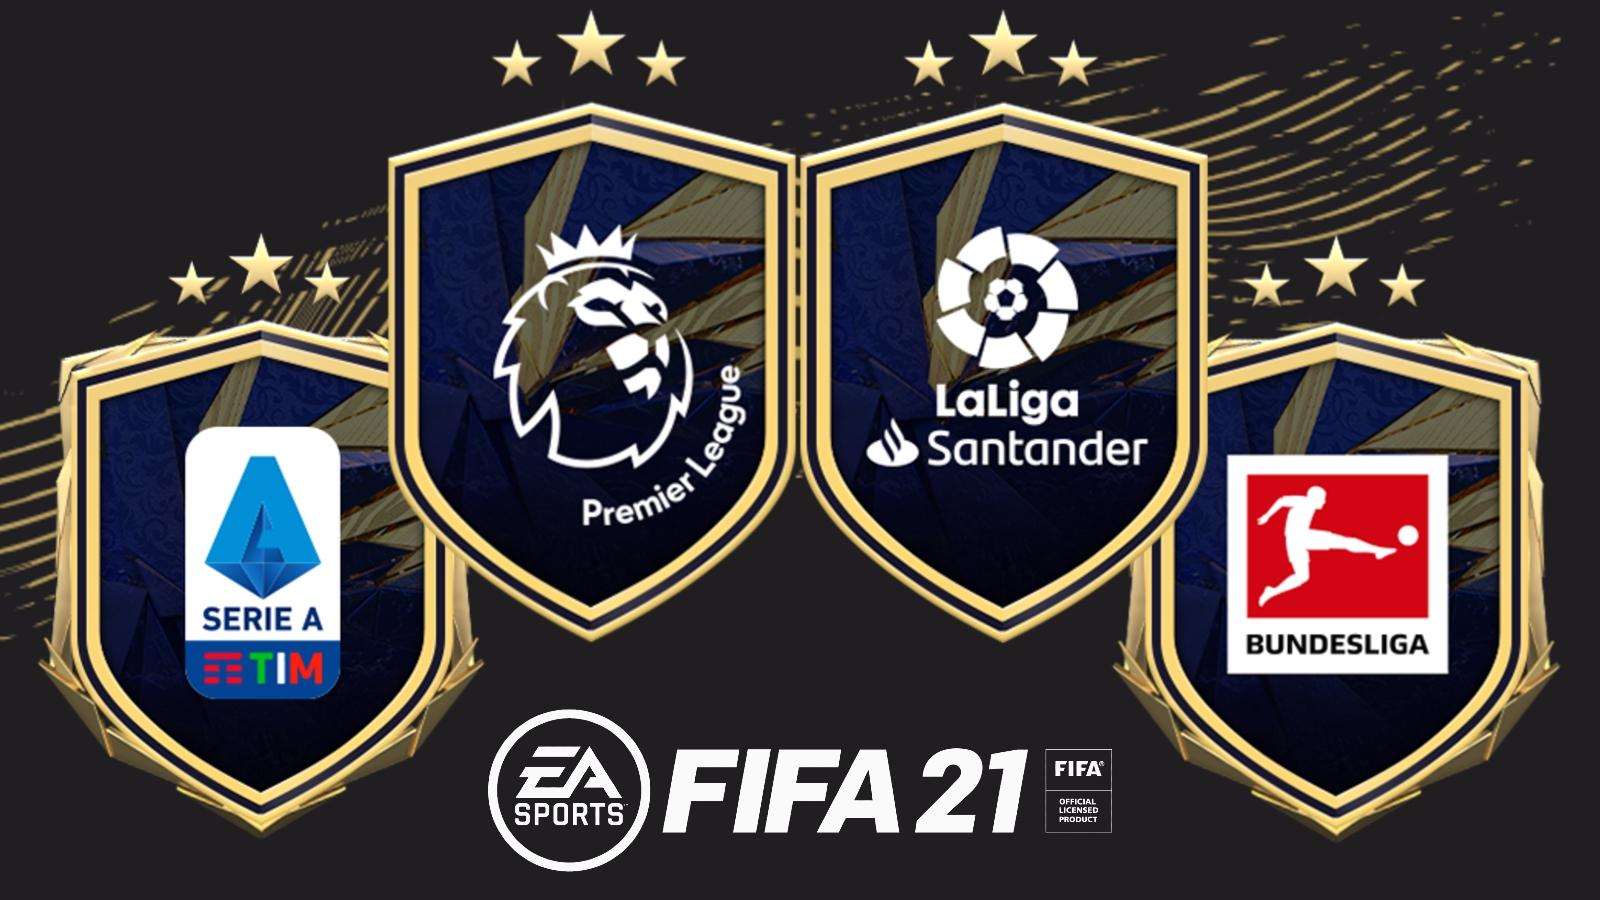 FIFA 21 Licences - All Clubs, Leagues and Stadiums REVEALED